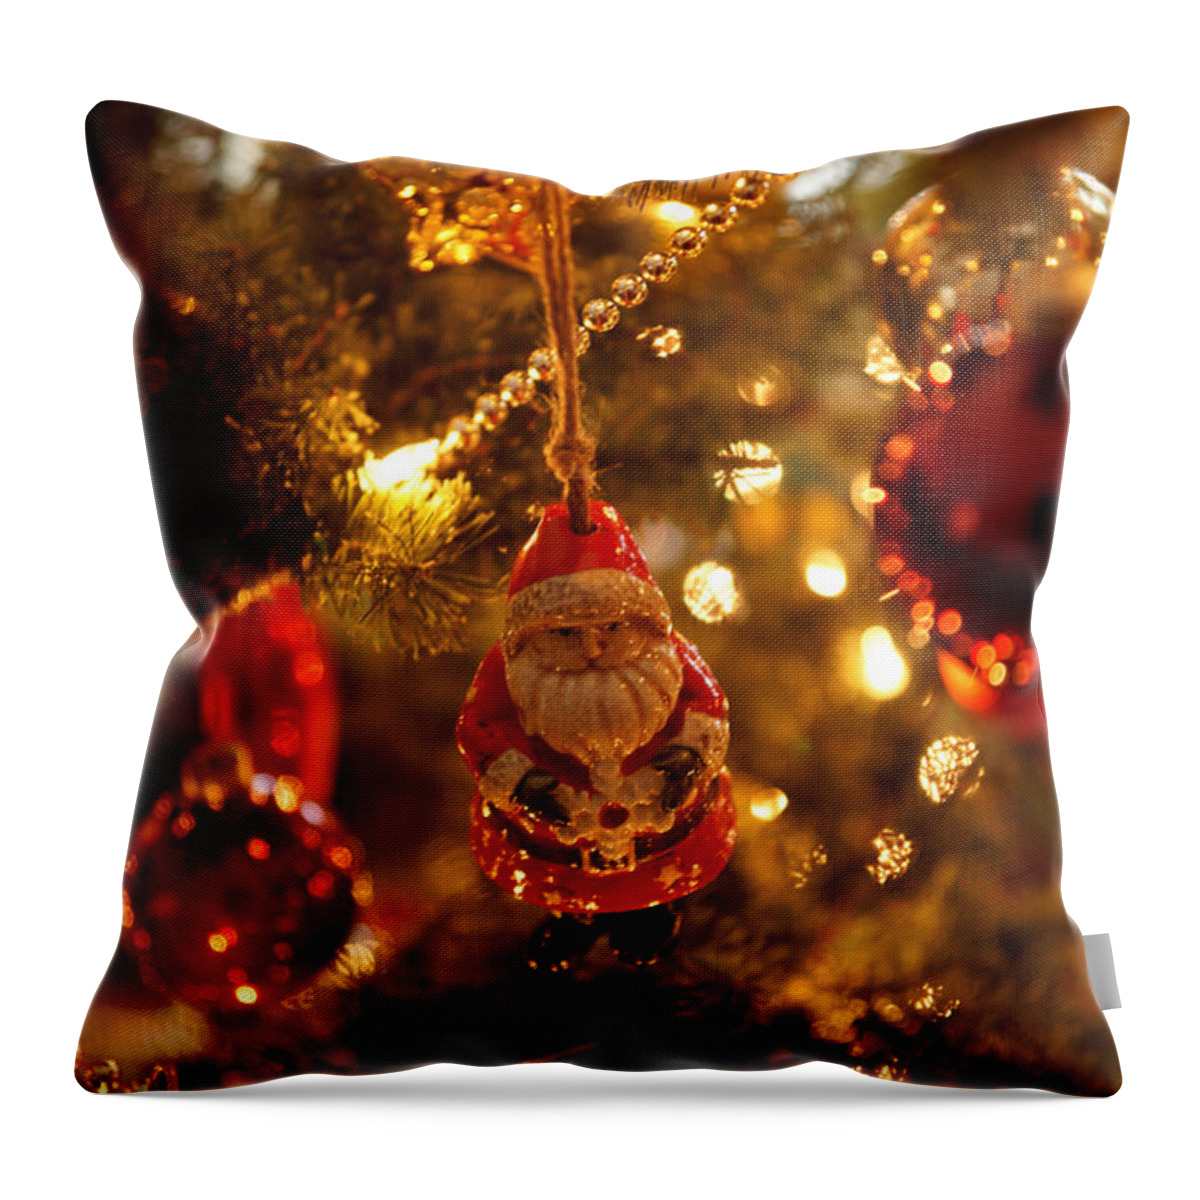 Christmas-ornament Throw Pillow featuring the photograph Snowflake Santa by Linda Shafer